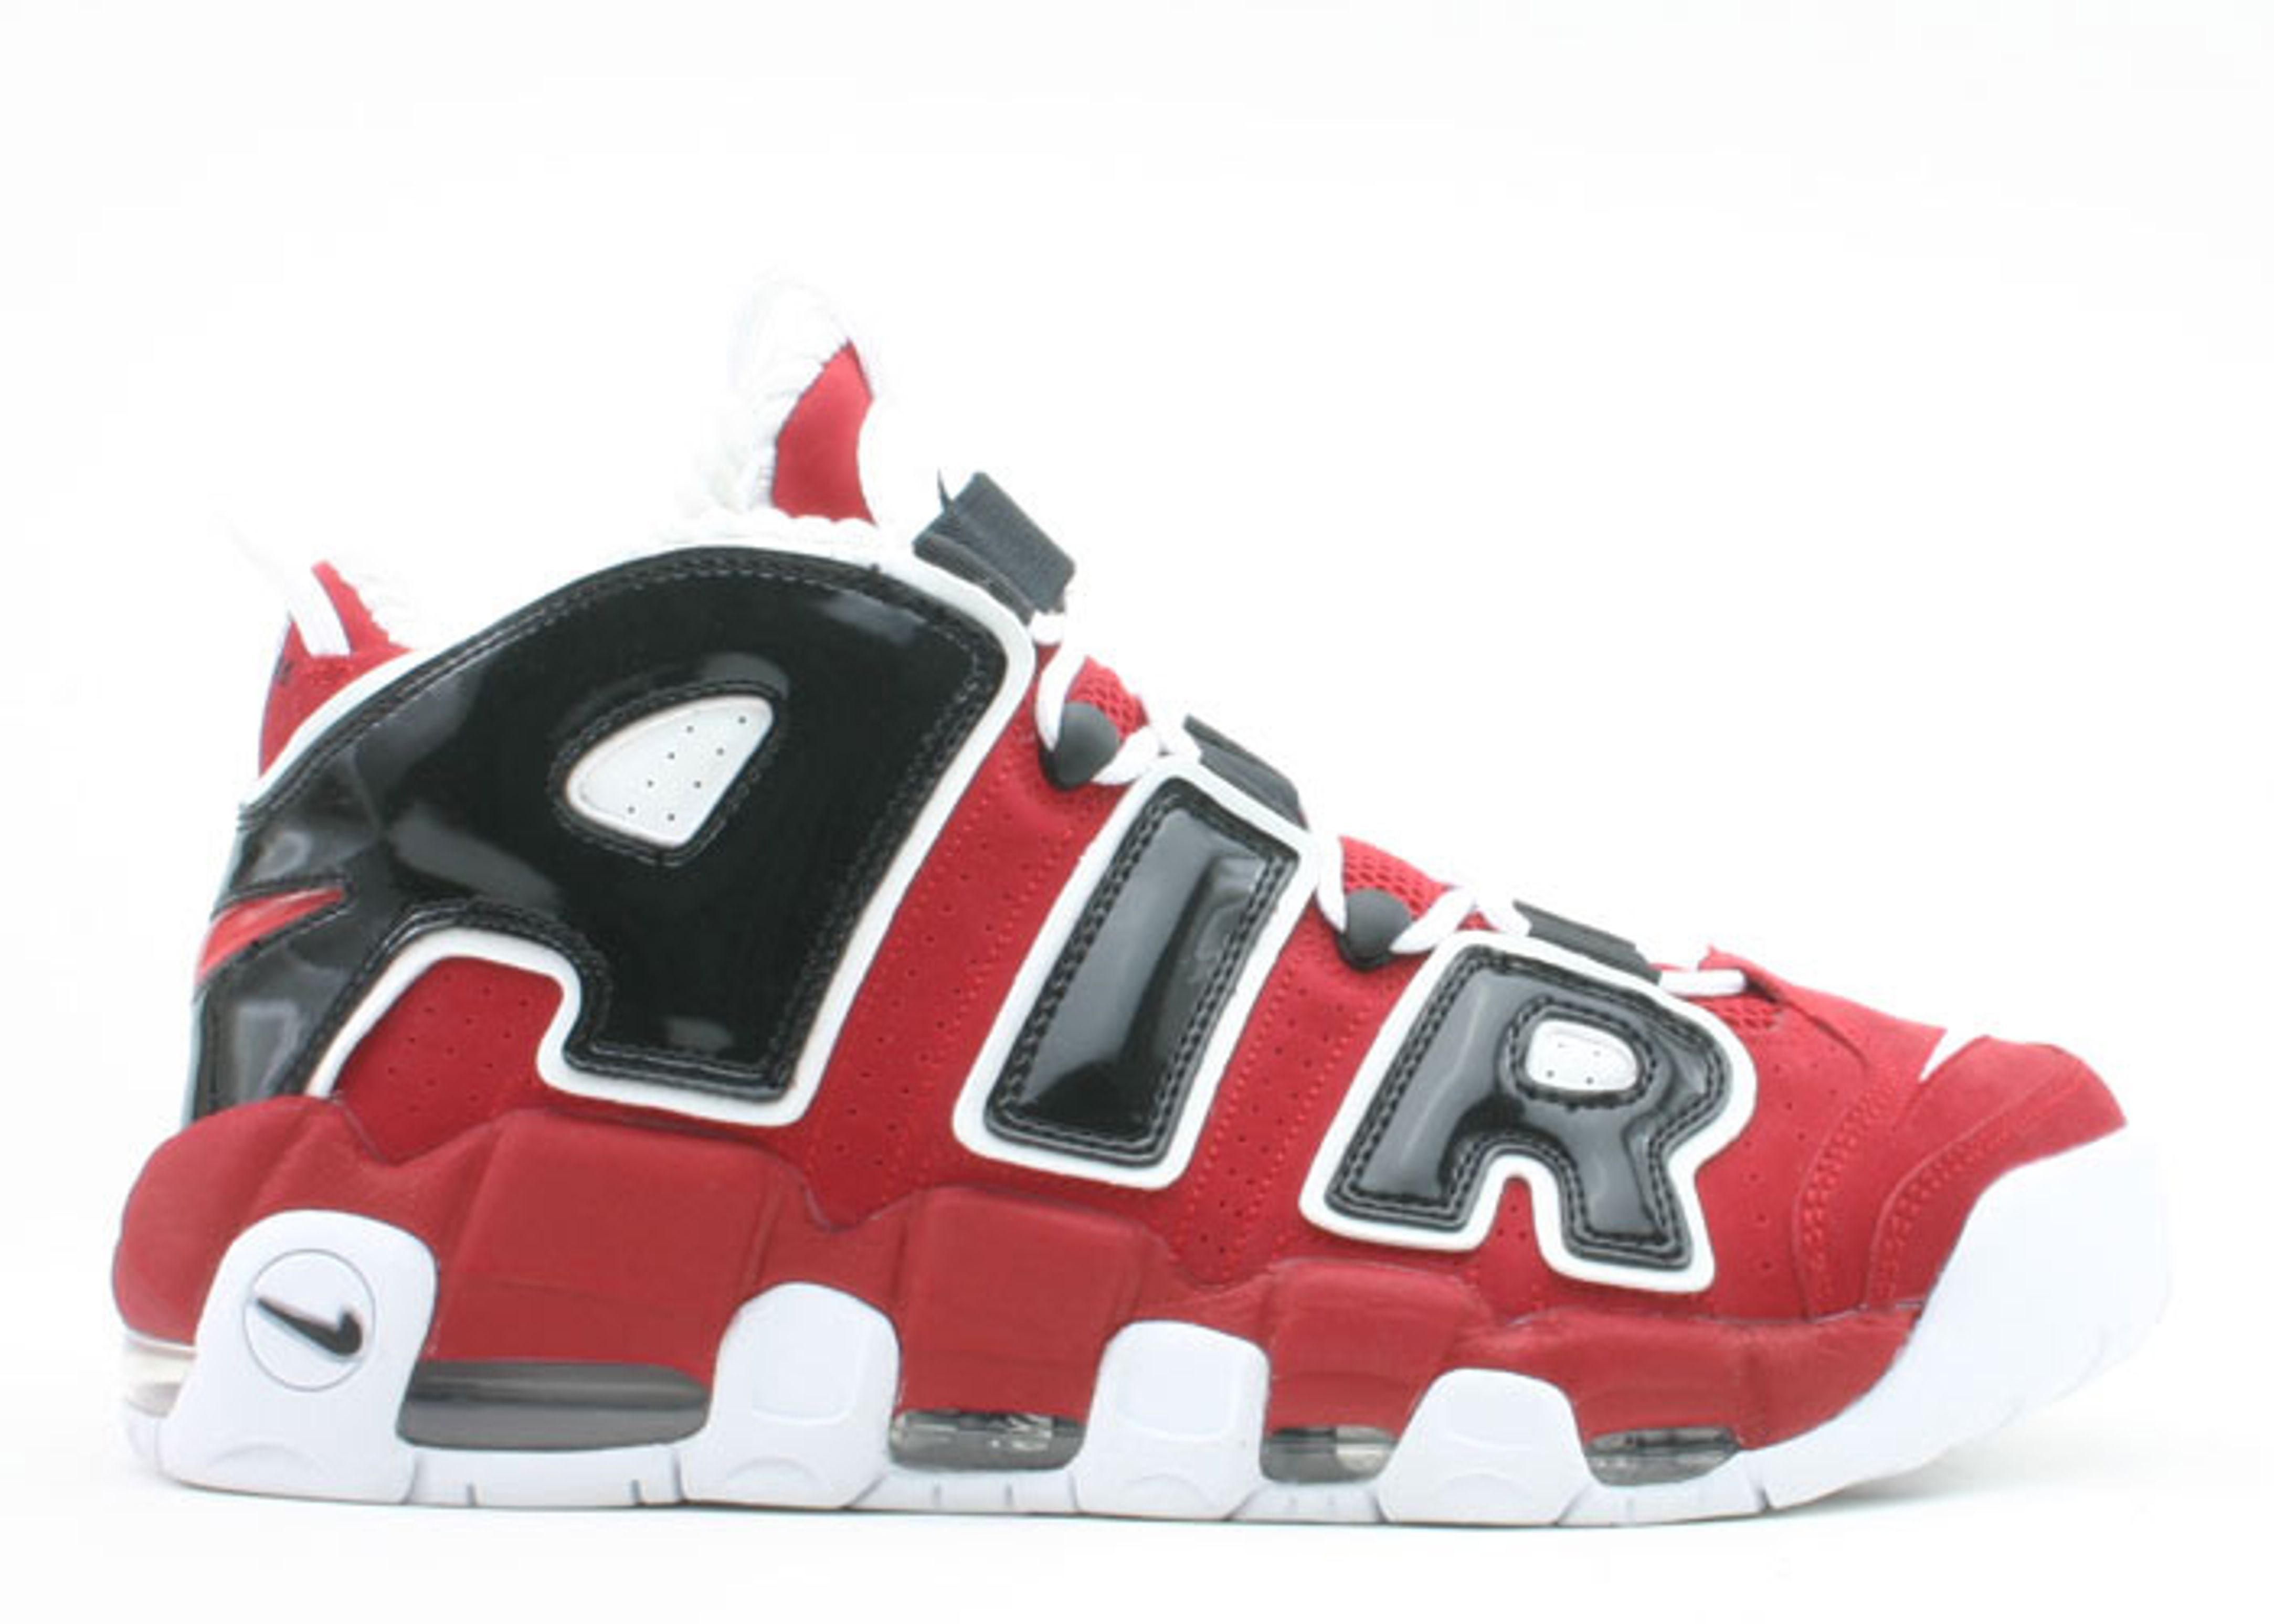 Nike air more uptempo red. Nike Uptempo Red Black. Nike Air more Uptempo Red/Black. Nike Air more Uptempo Black White. Nike Air more черно красные.